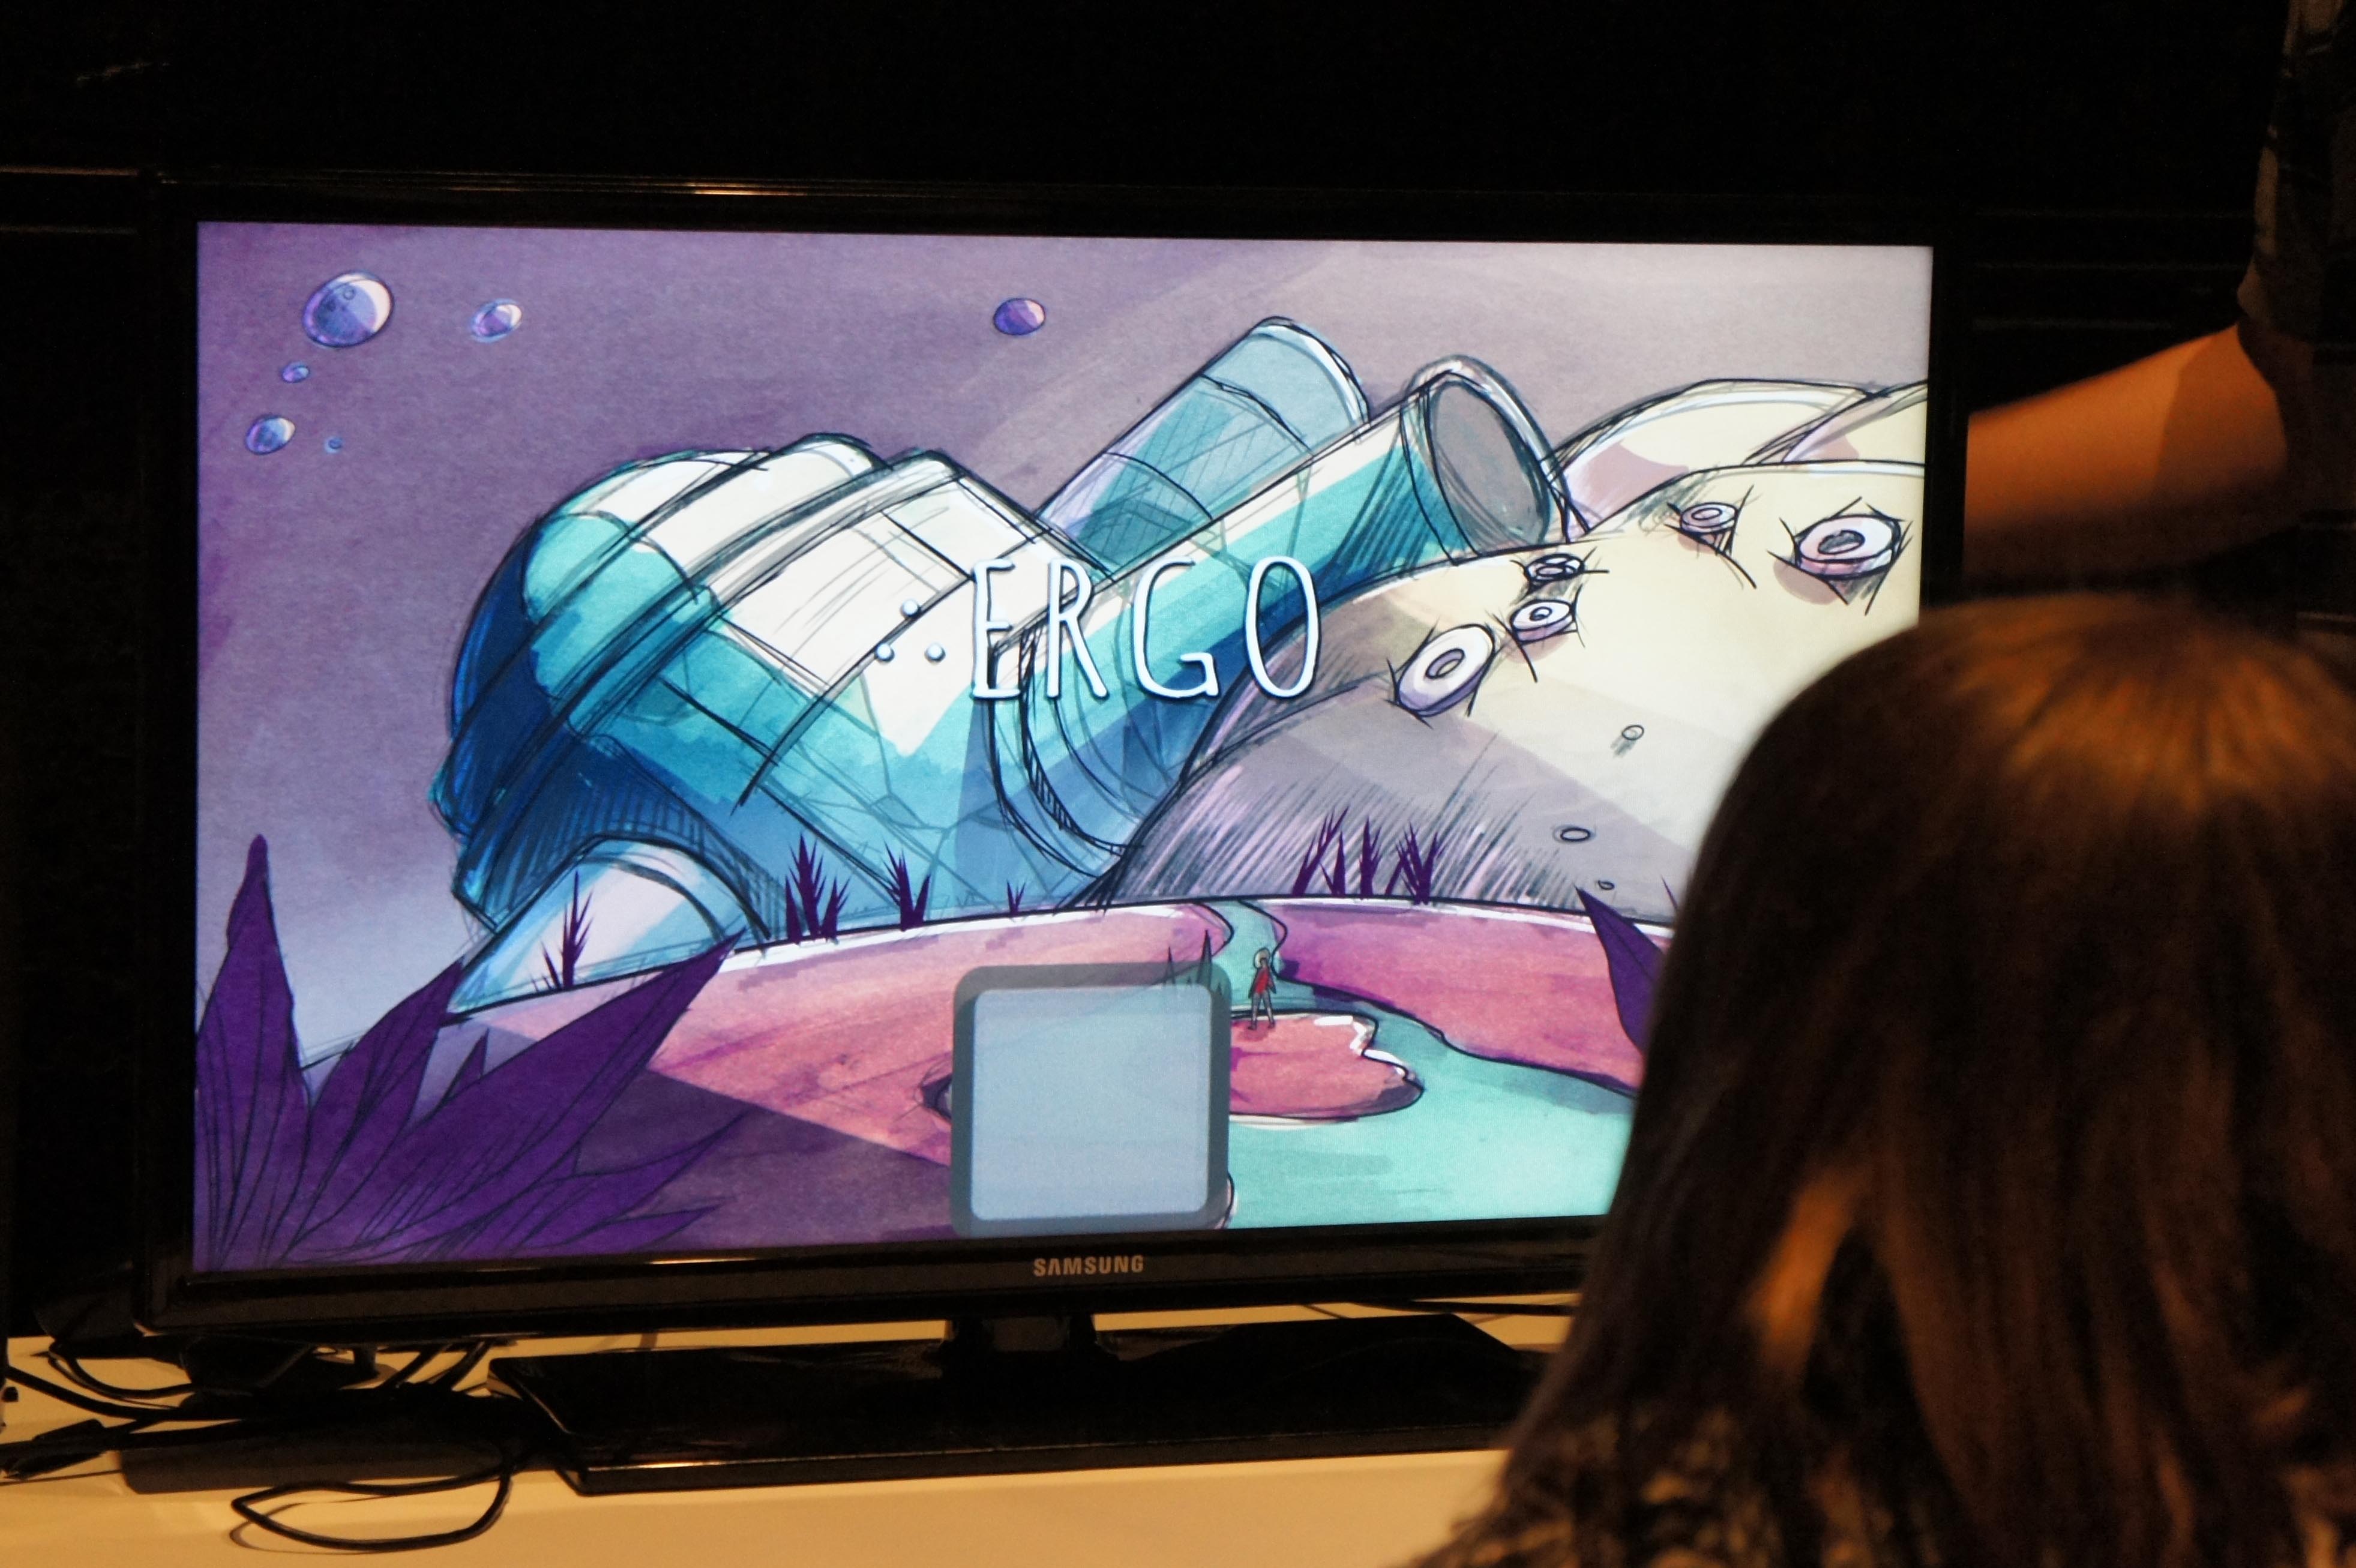 Student looking at the title screen of Ergo at GameFest 2016.